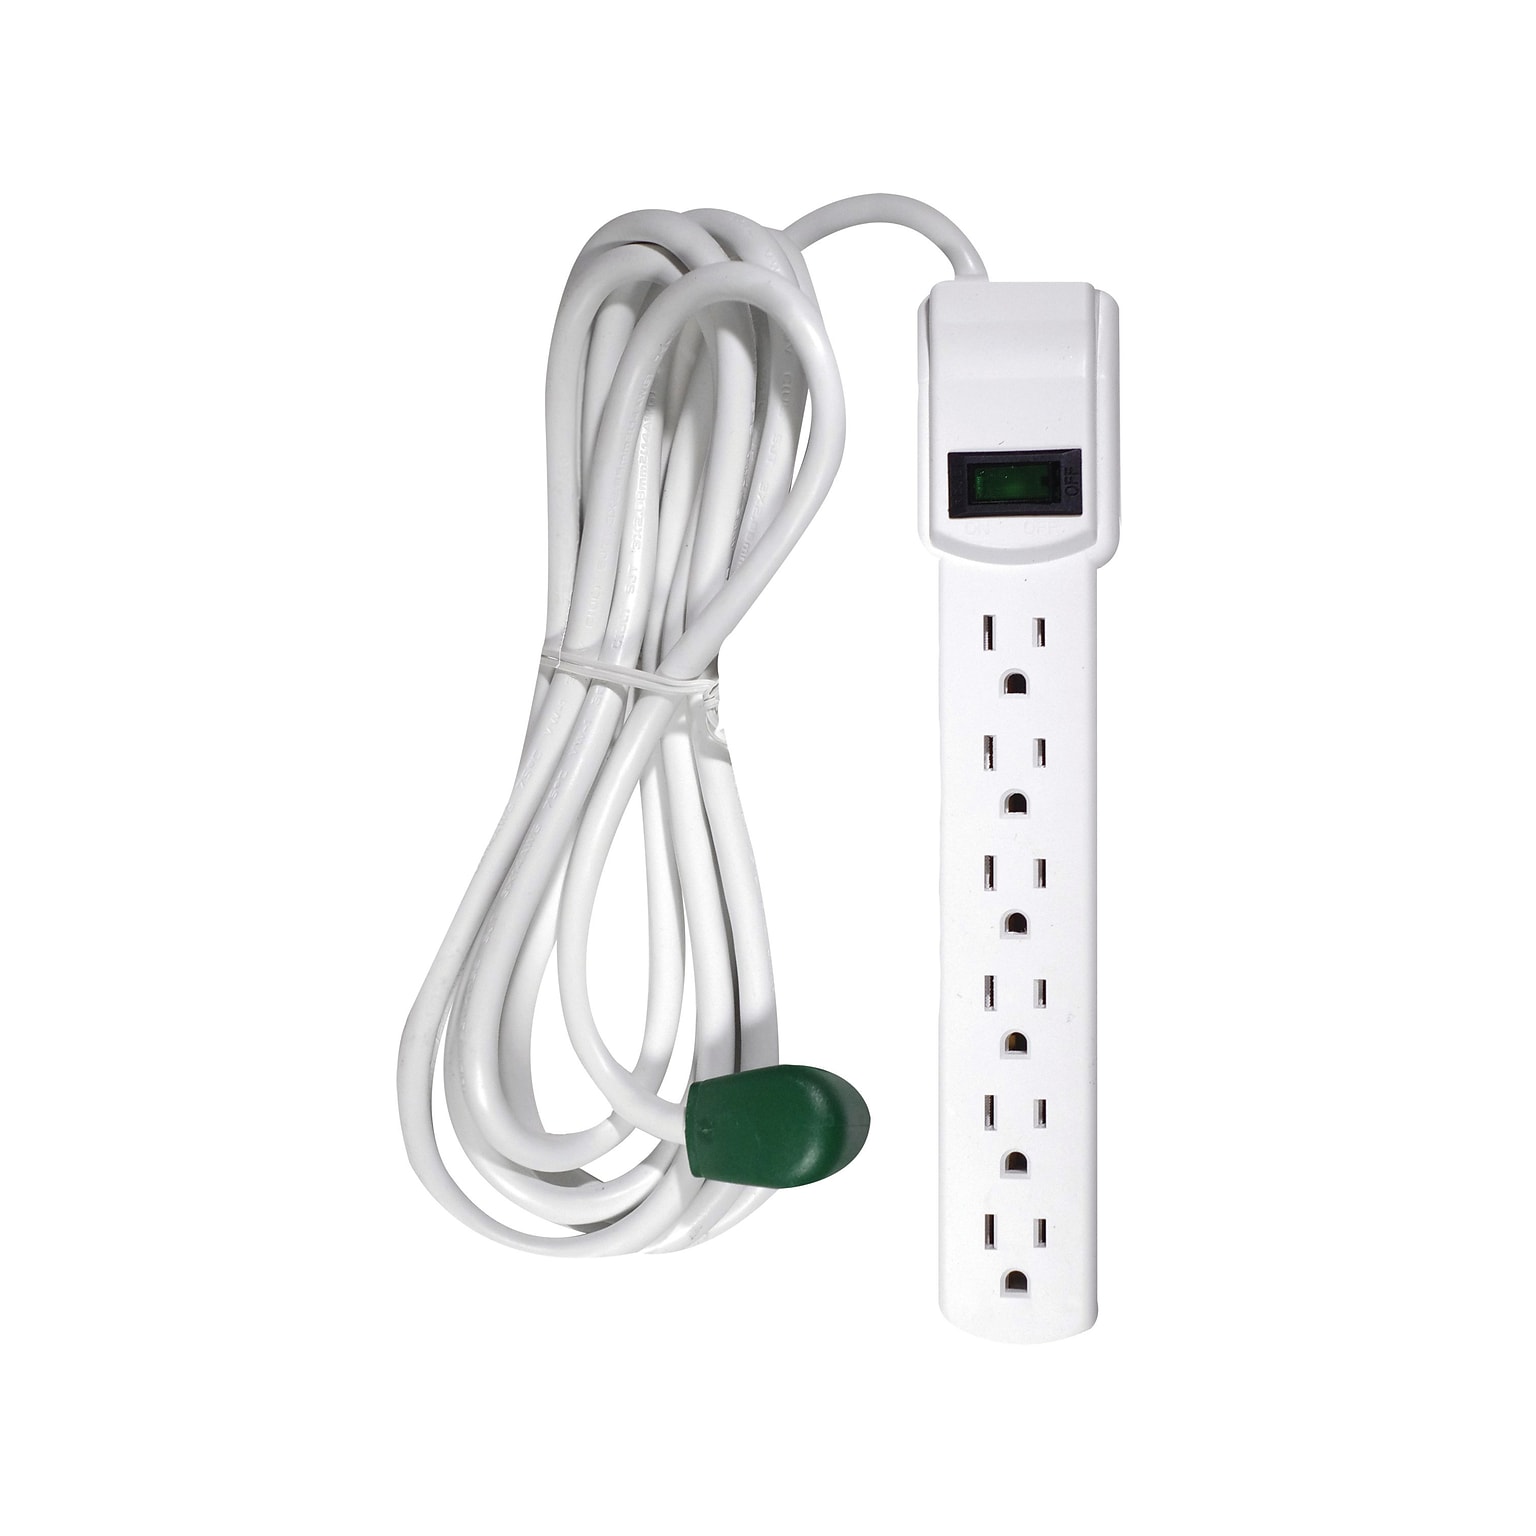 GoGreen Power 6 Outlet Surge Protector, 12 cord, White, GG-16103M-12